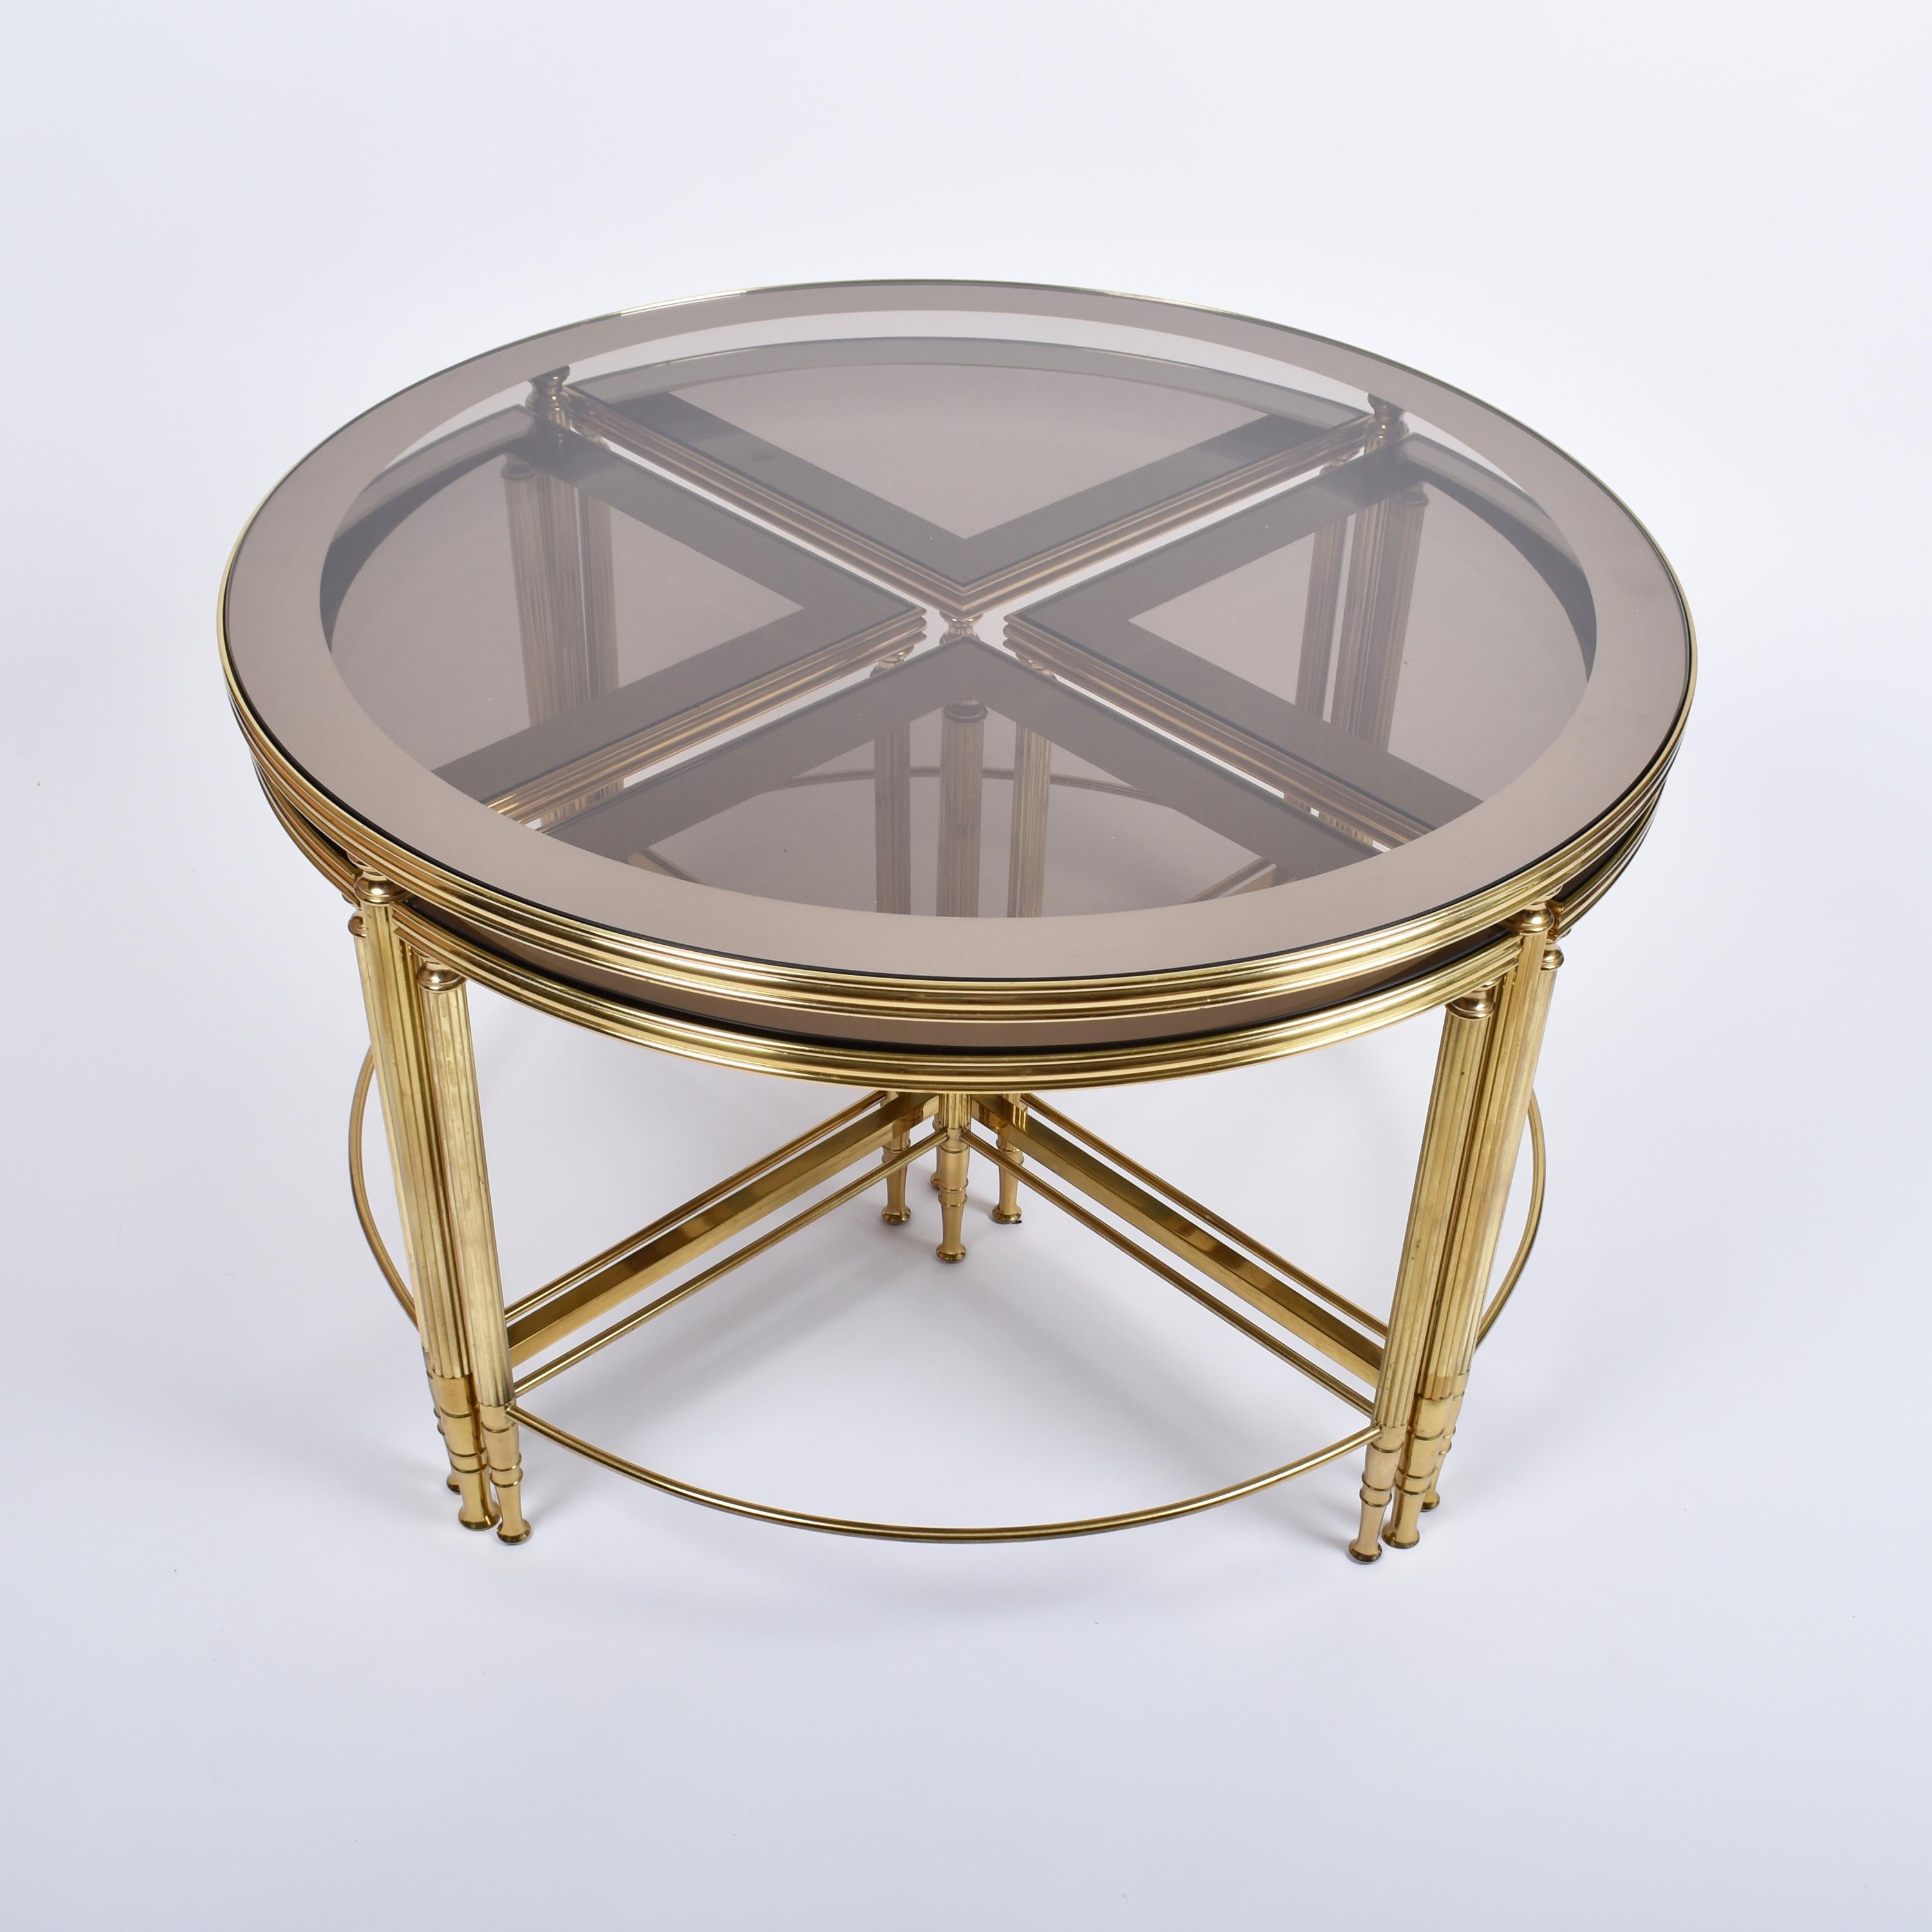 Mid-Century Modern set of five brass and glass coffee tables, in excellent condition.
Elegant ensemble of nesting tables, composed of one main round and four smaller quarters.
The glass top is lightly smoked and mirrored on the sides.
The brass